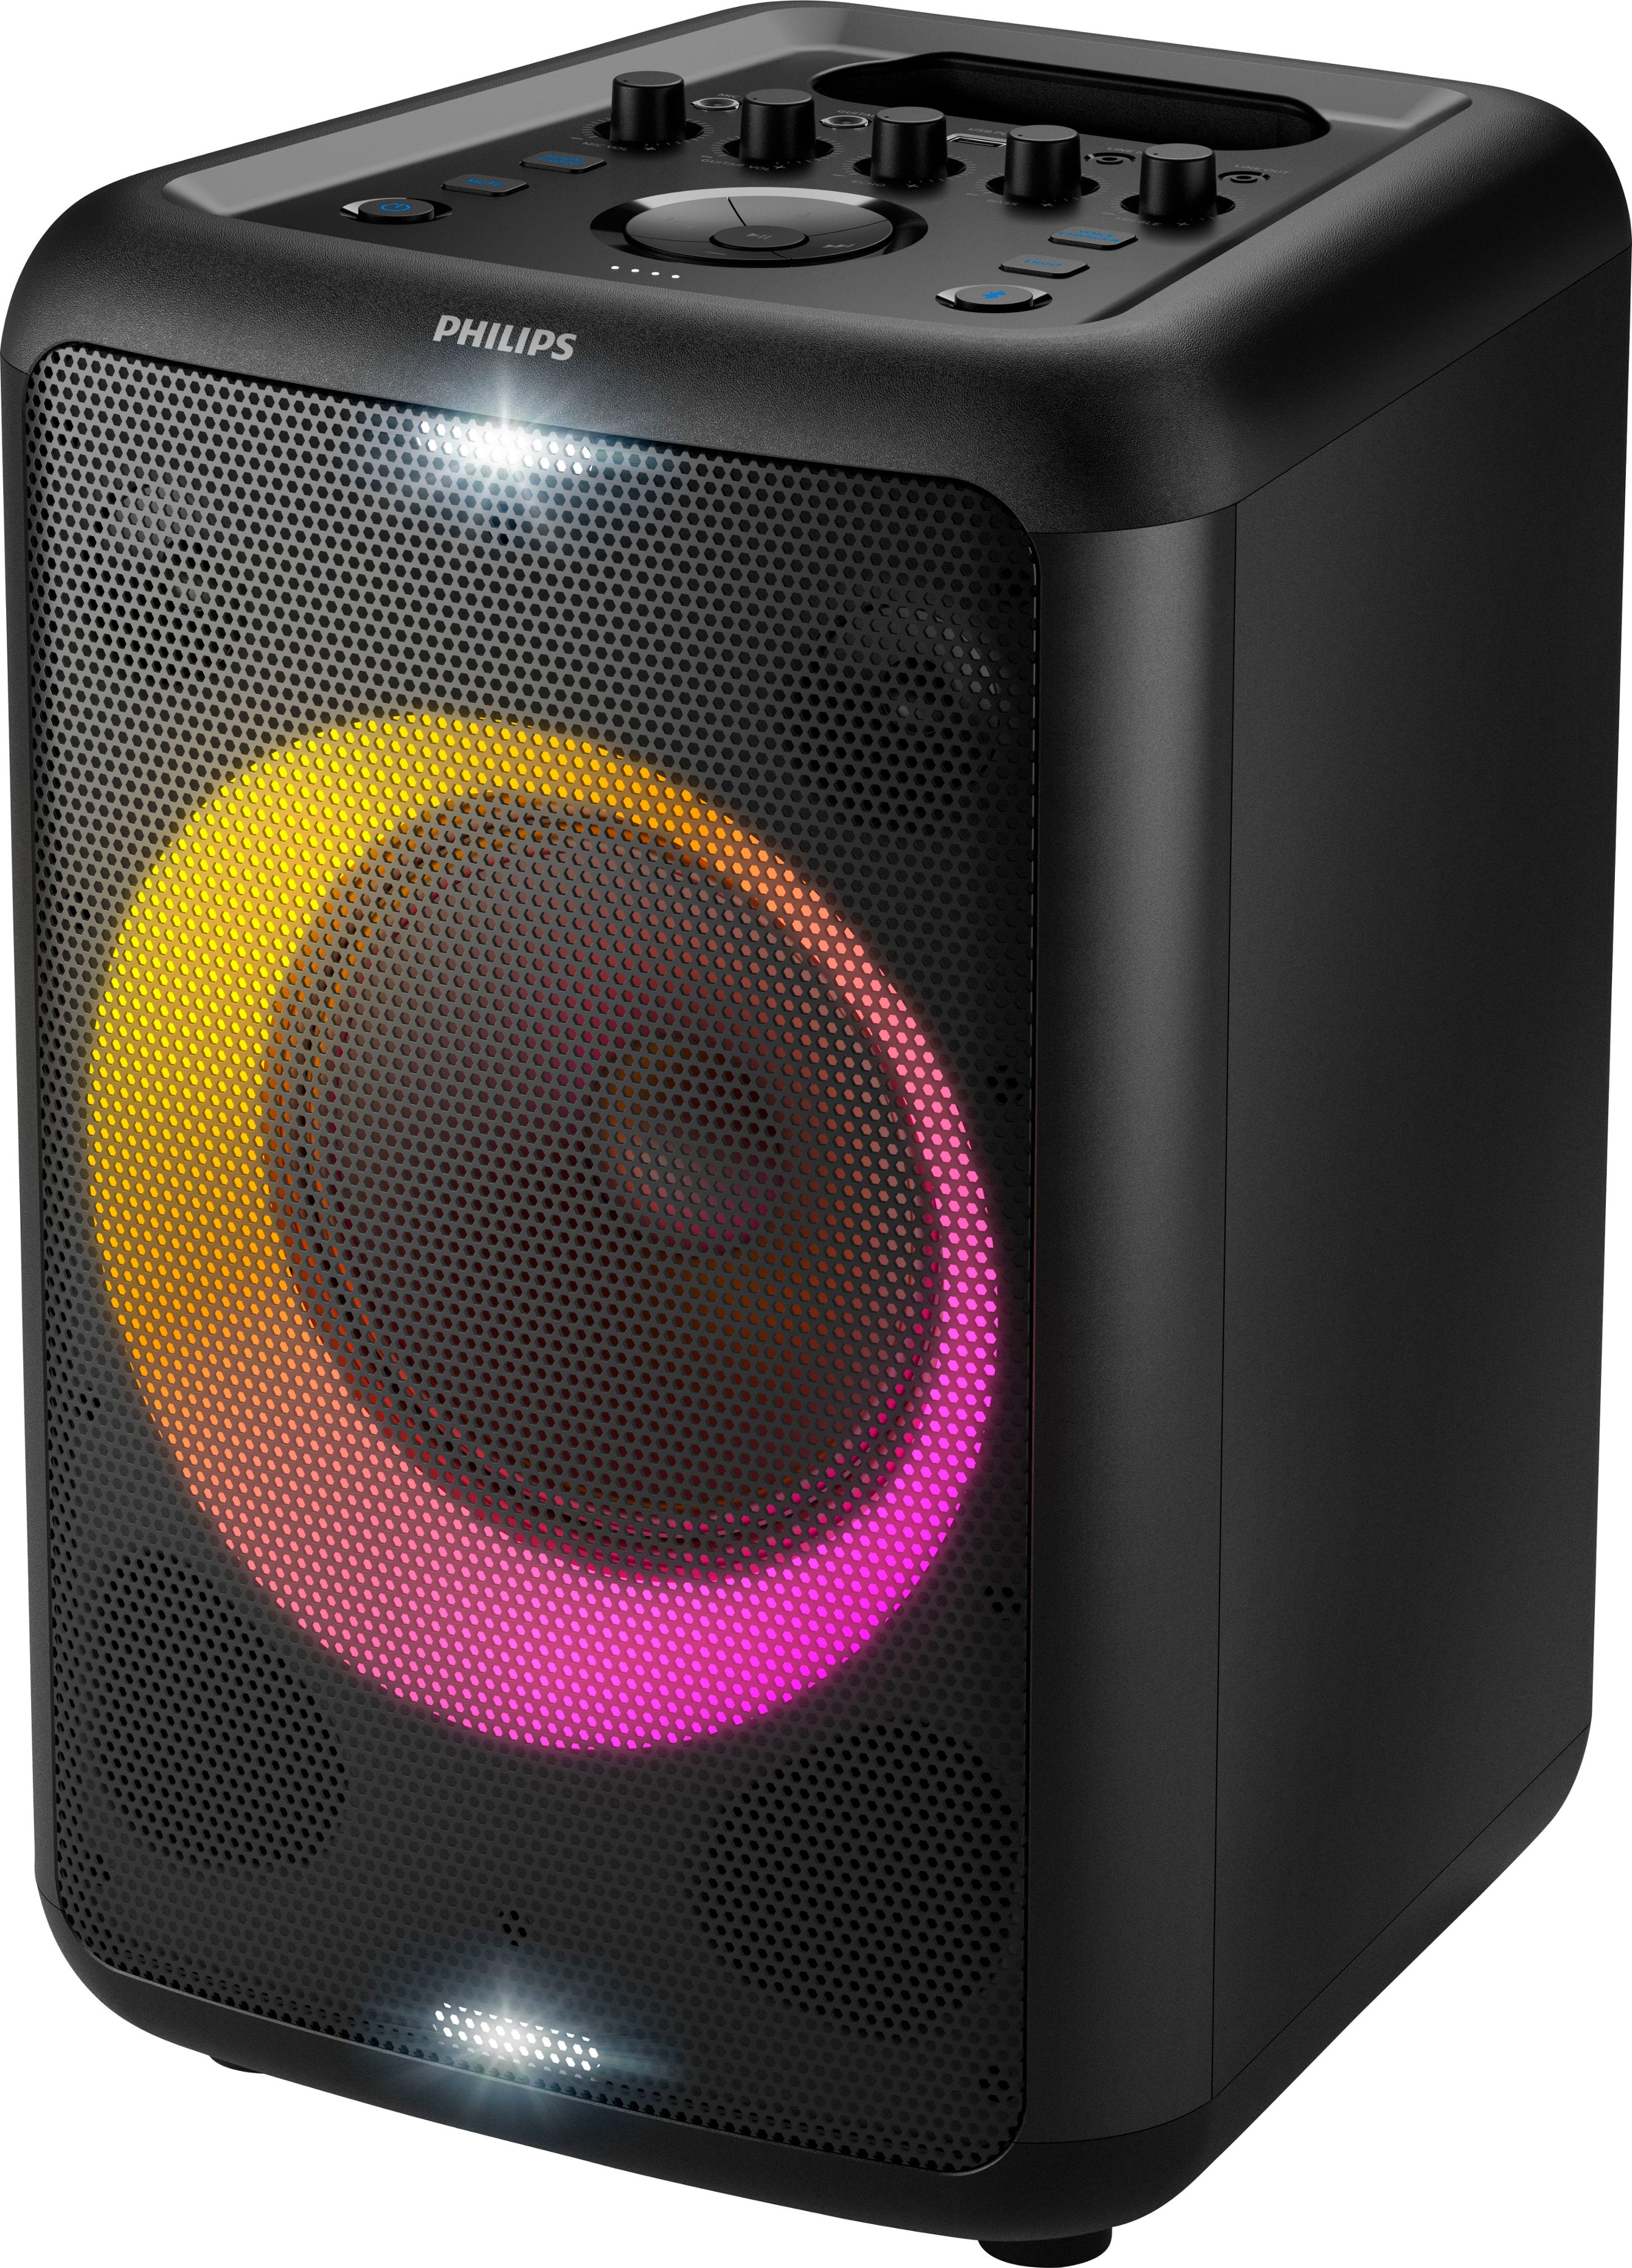 Angle View: Philips - Portable Bluetooth Party Speaker with Party Lights and Built-in Carry Handle - Black